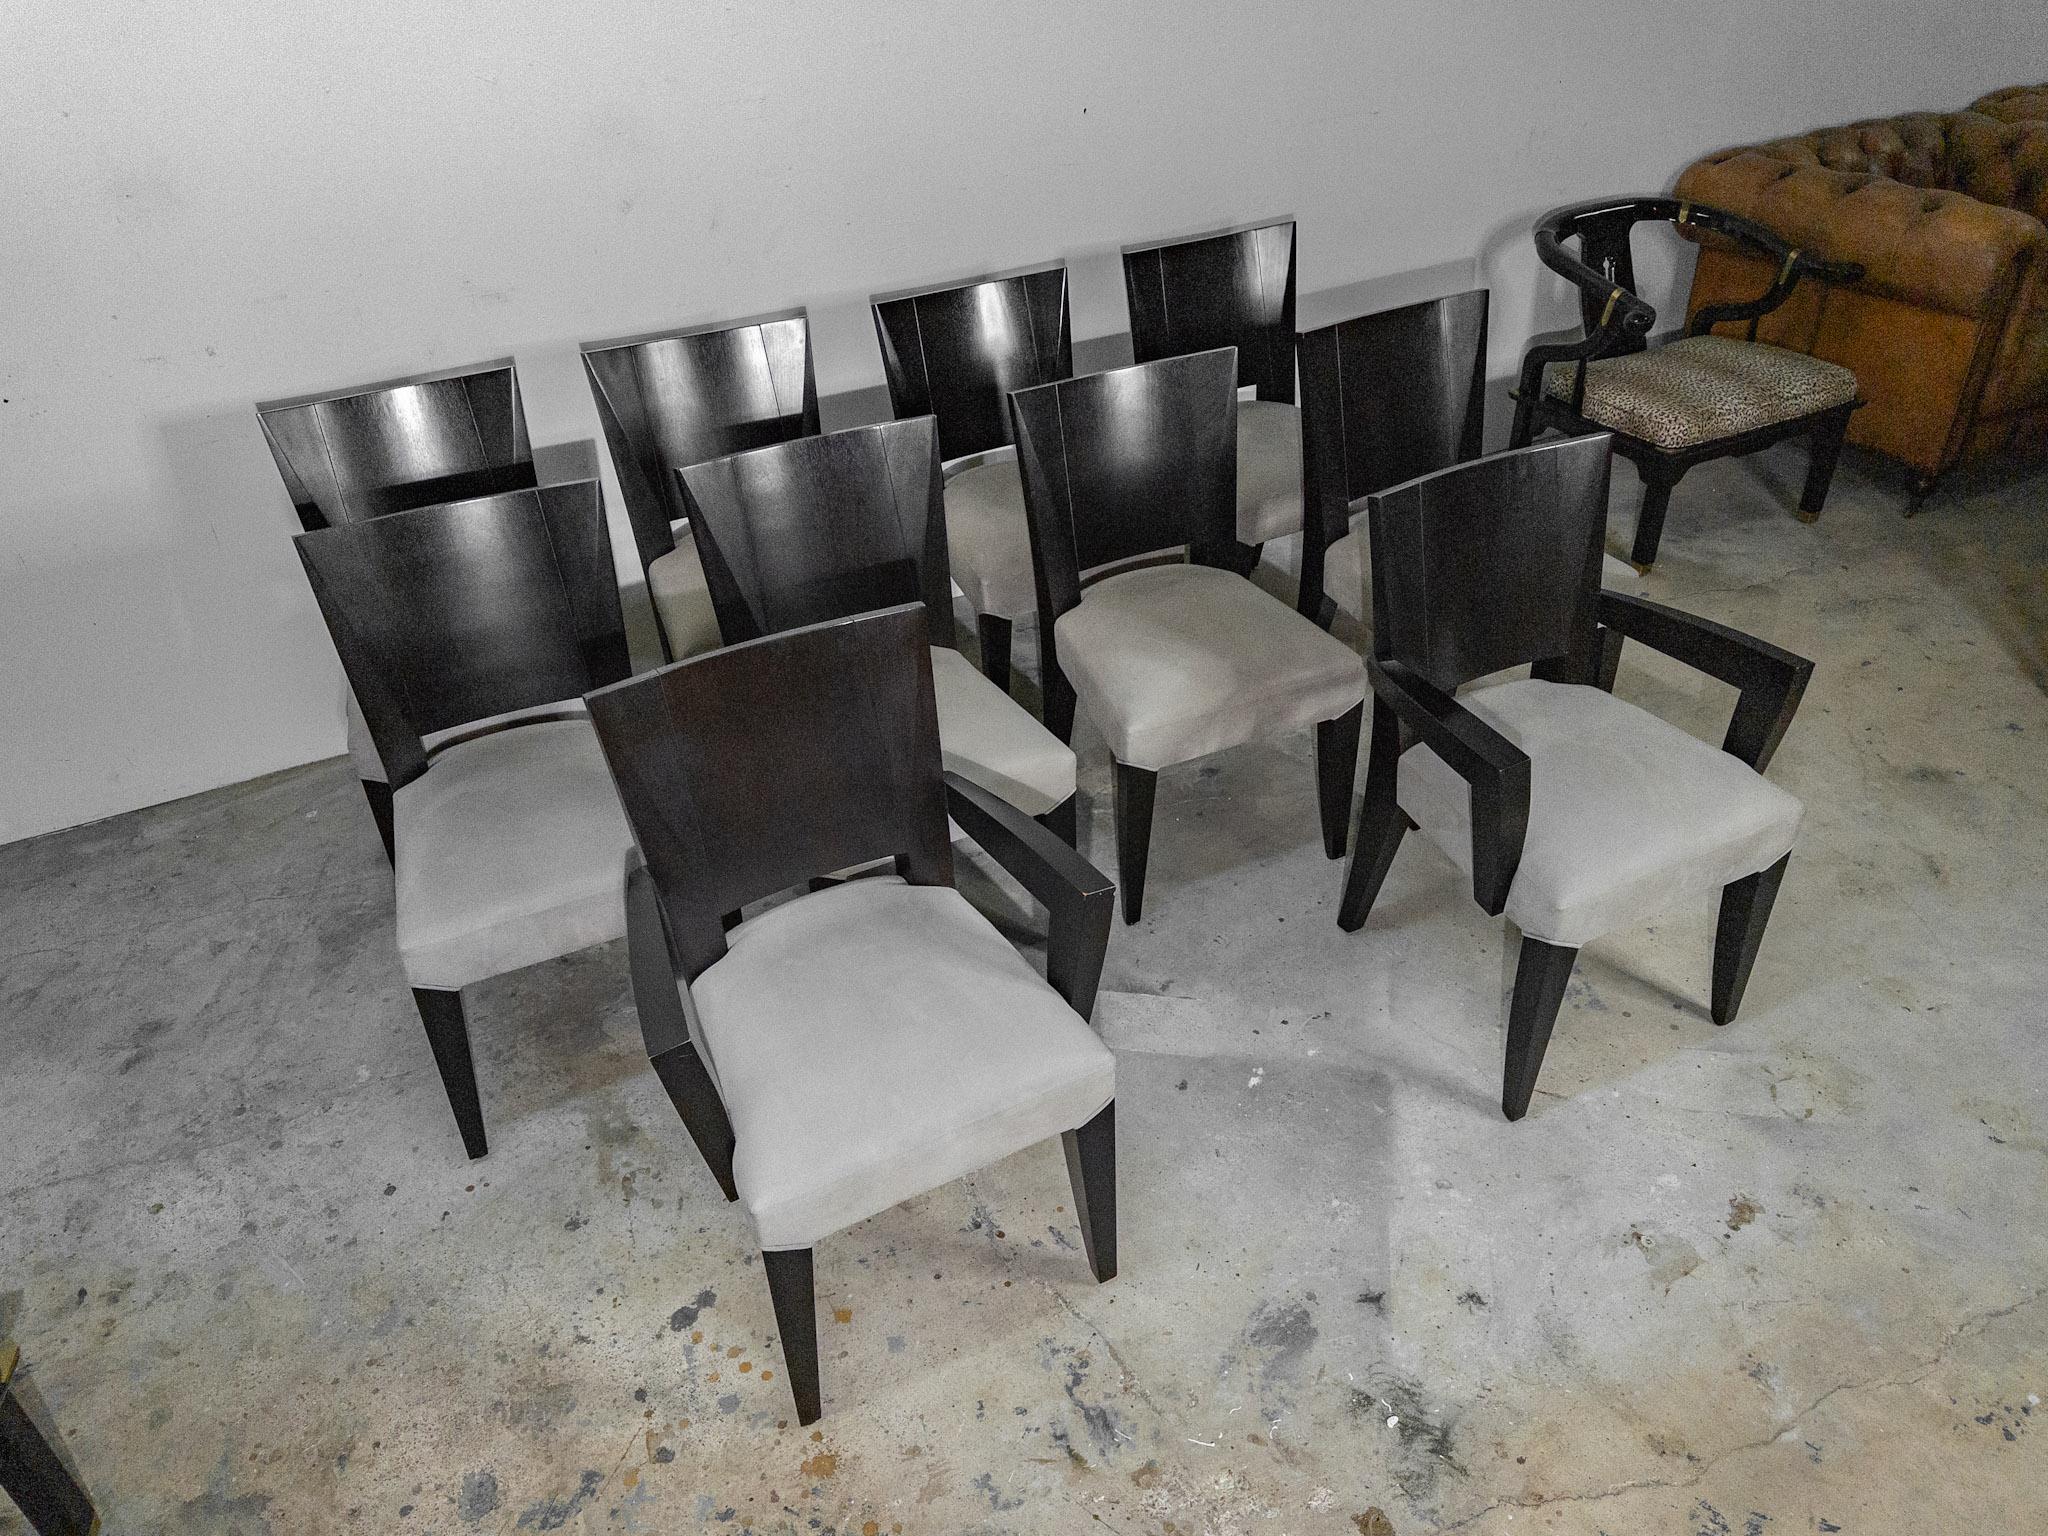 Mid-Century Modern Set of 10 Ocean Dining Chairs by Dakota Jackson (2 Arm Chairs, 8 Side Chairs) For Sale